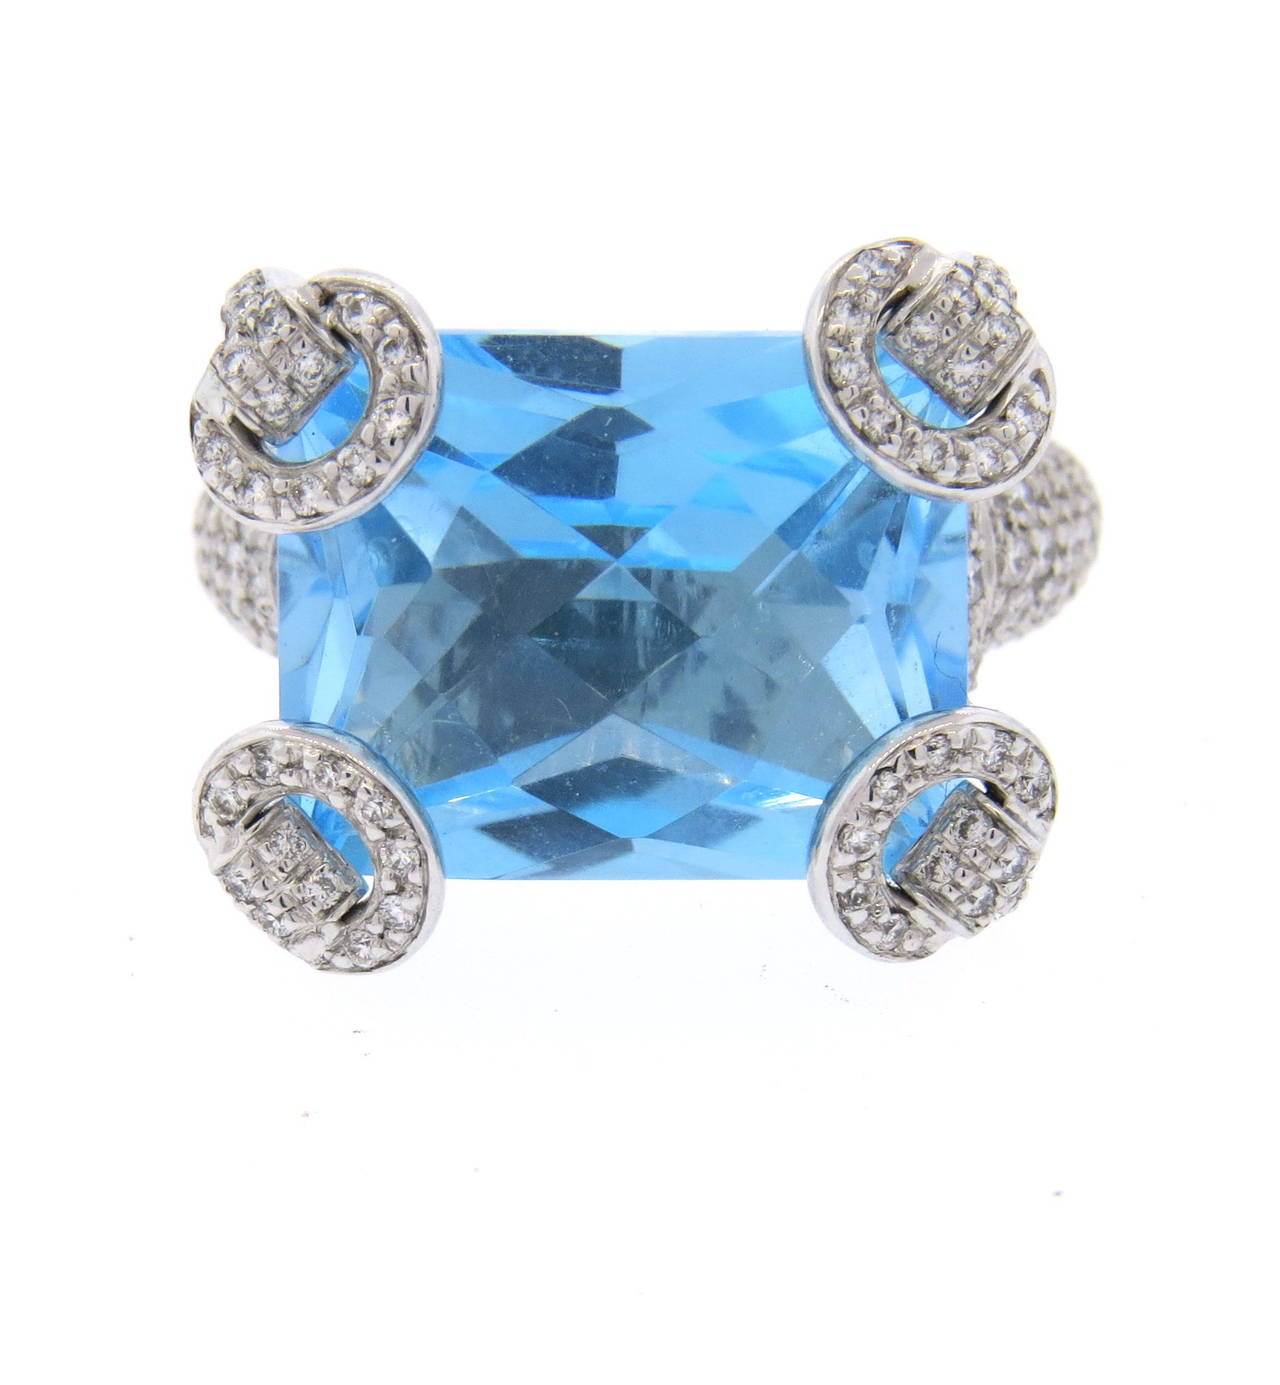 An 18k white gold ring set with 0.90cts in G/VS diamonds and a 17ct blue topaz.  Crafted by Gucci for their Horsebit collection, the ring is a size 6.75.  The top of the ring is 20mm x 17mm.  The ring weighs 16.3 grams.  Currently retailed by Gucci